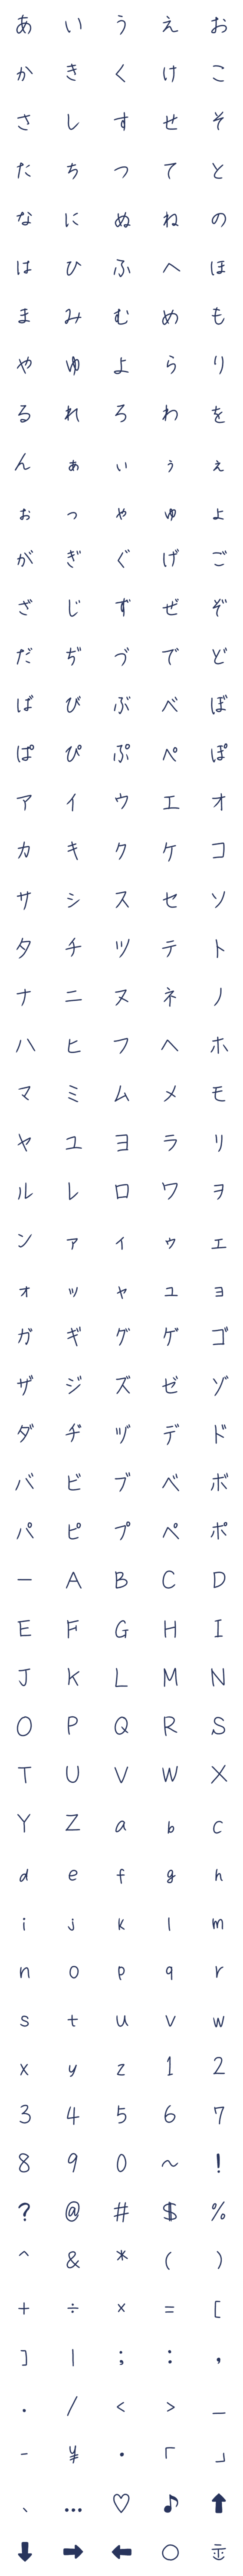 [LINE絵文字]フォーマルな濃紺文字の画像一覧